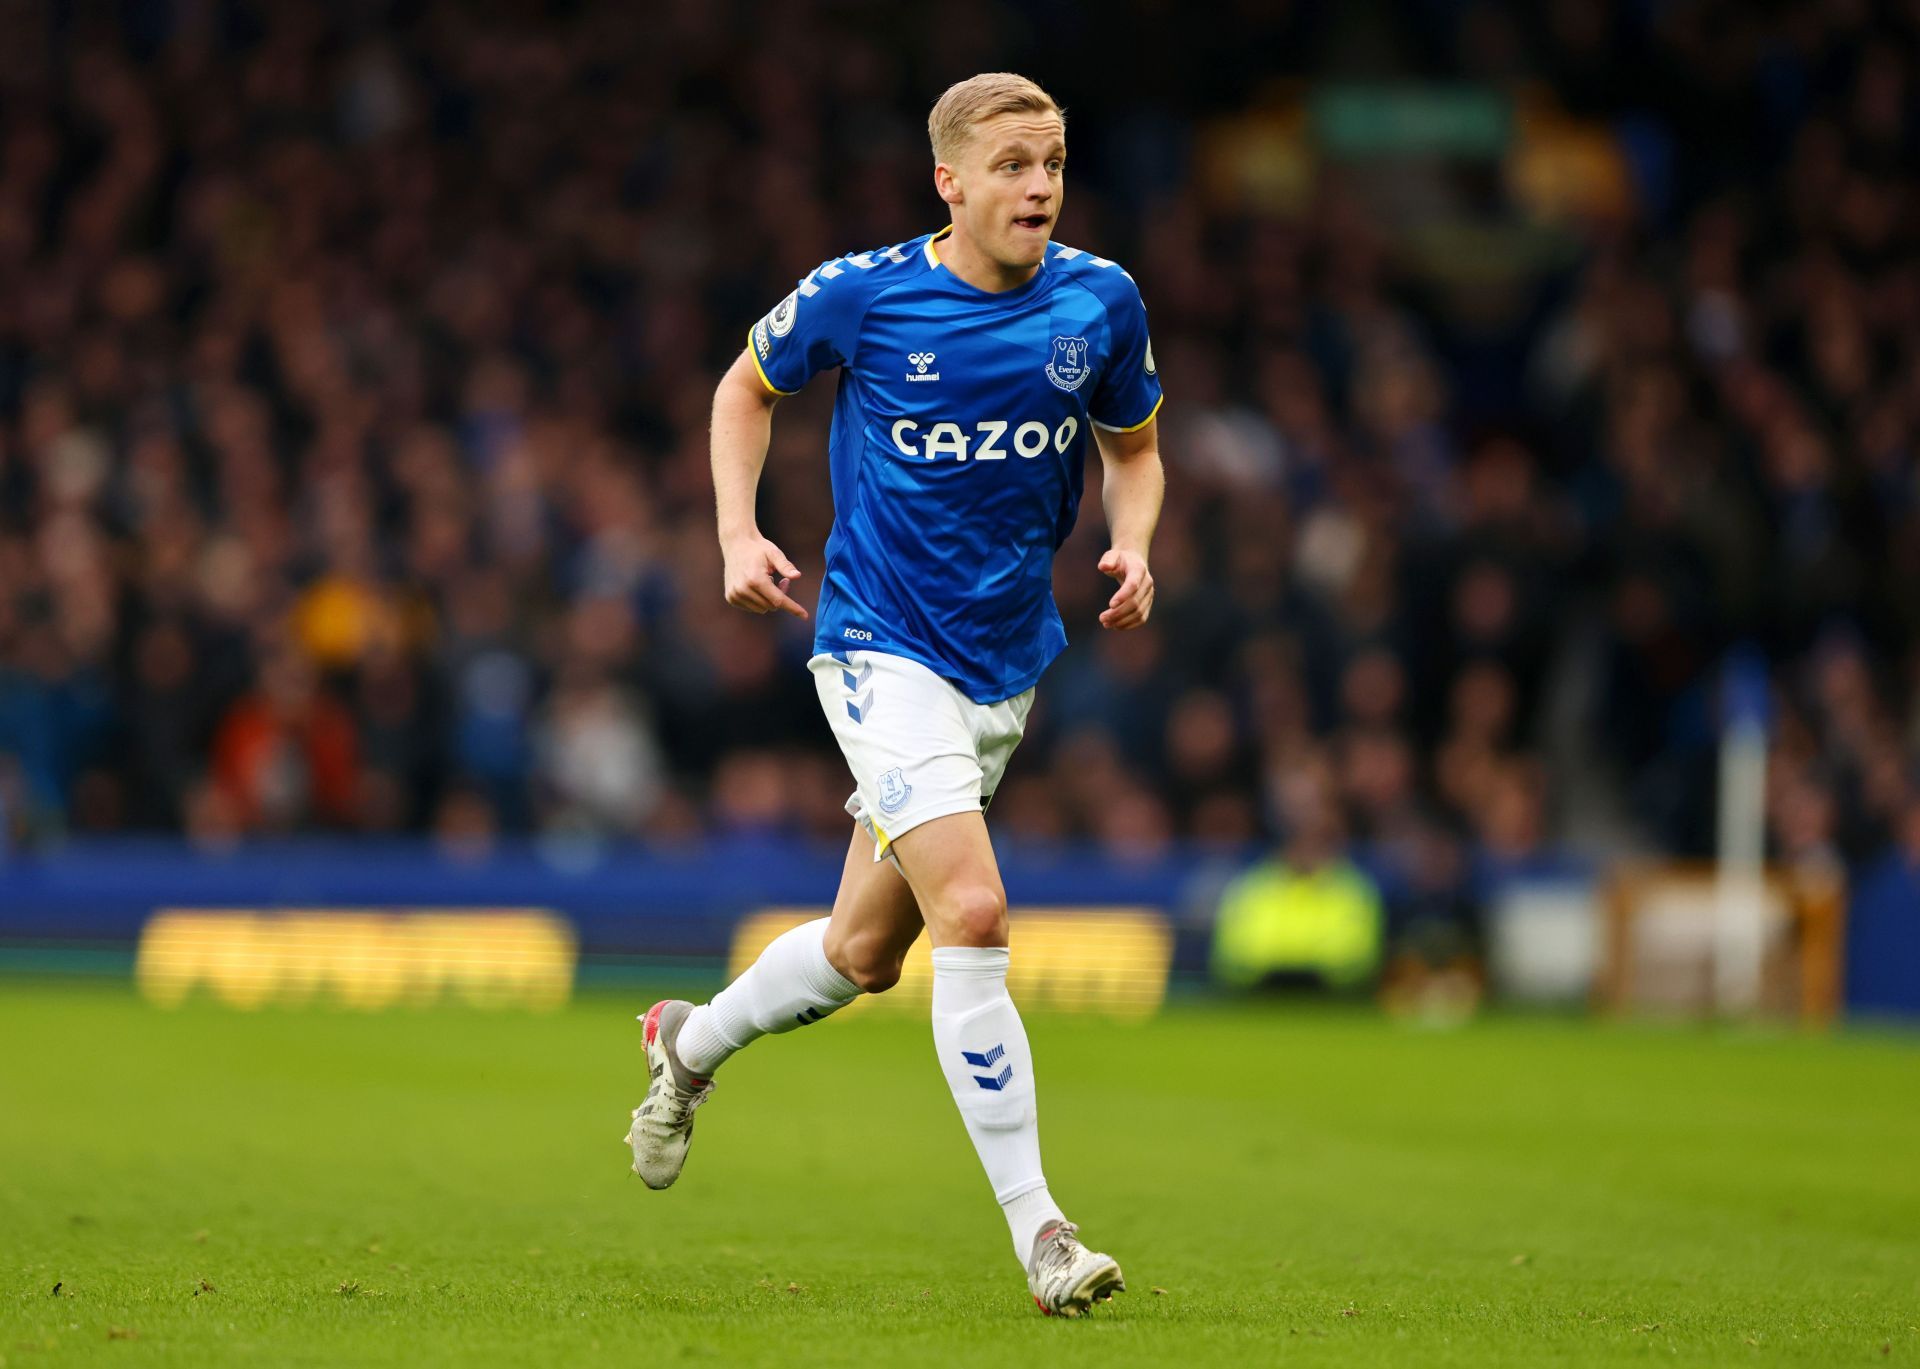 Alex McLeish has tipped Everton to sign Donny van de Beek (in pic) permanently.